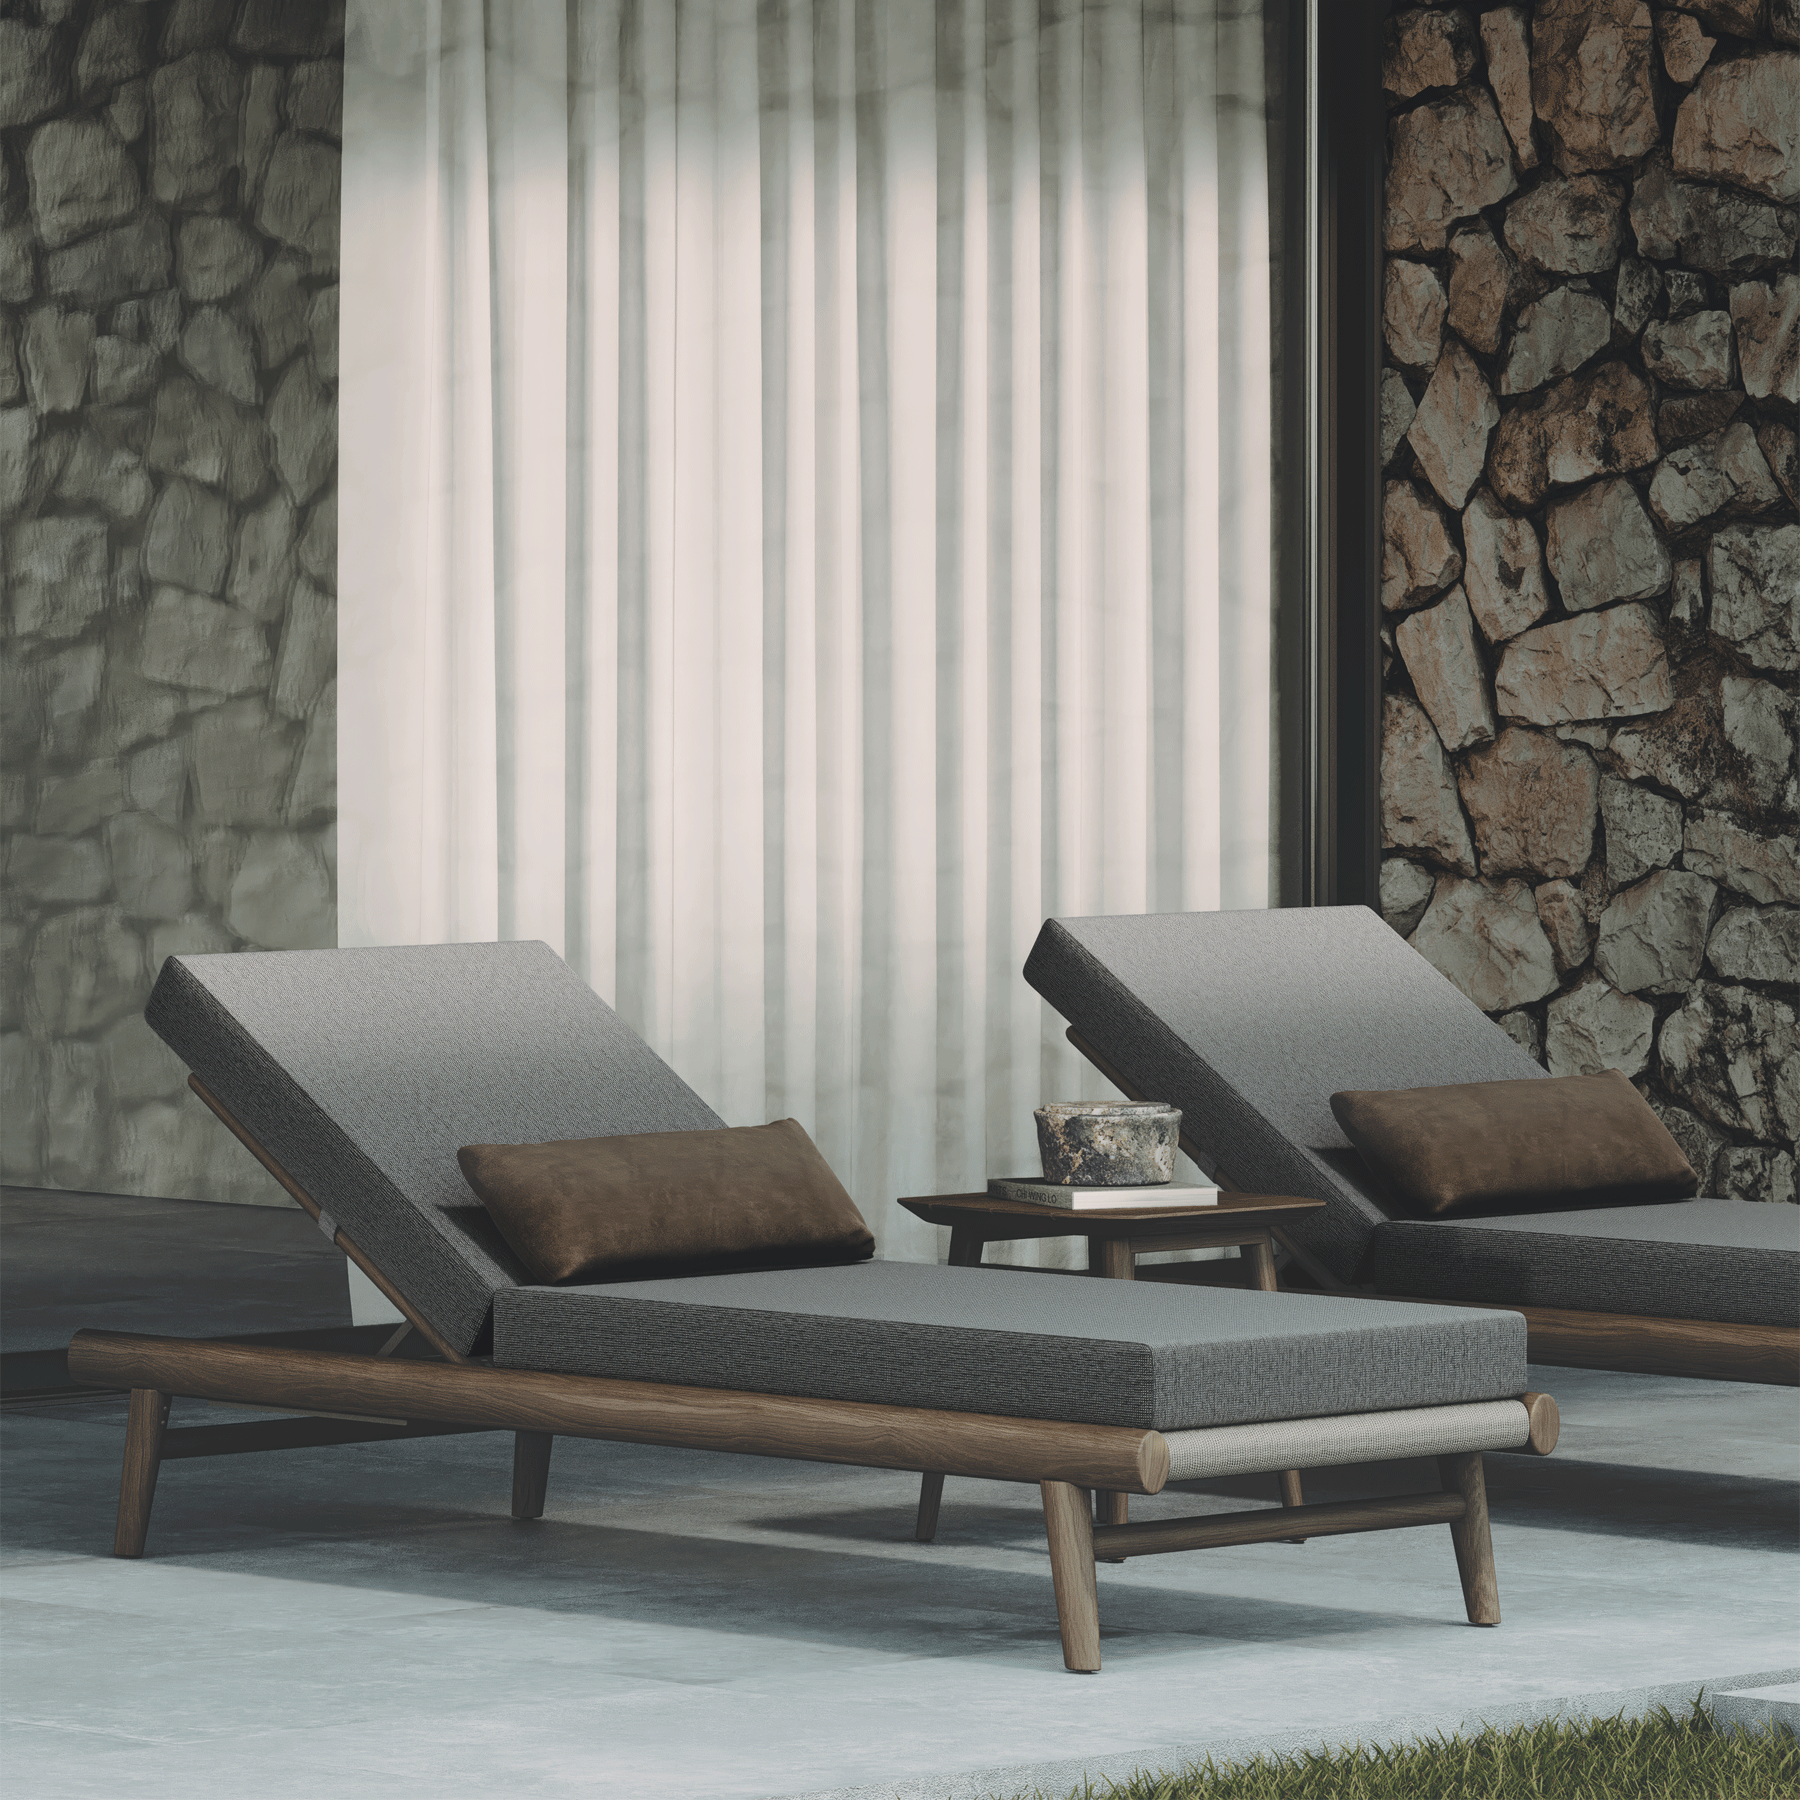 N1 luxury dark teak outdoor furniture with mid century inspired rope detail with fabric sun loungers and matching side table